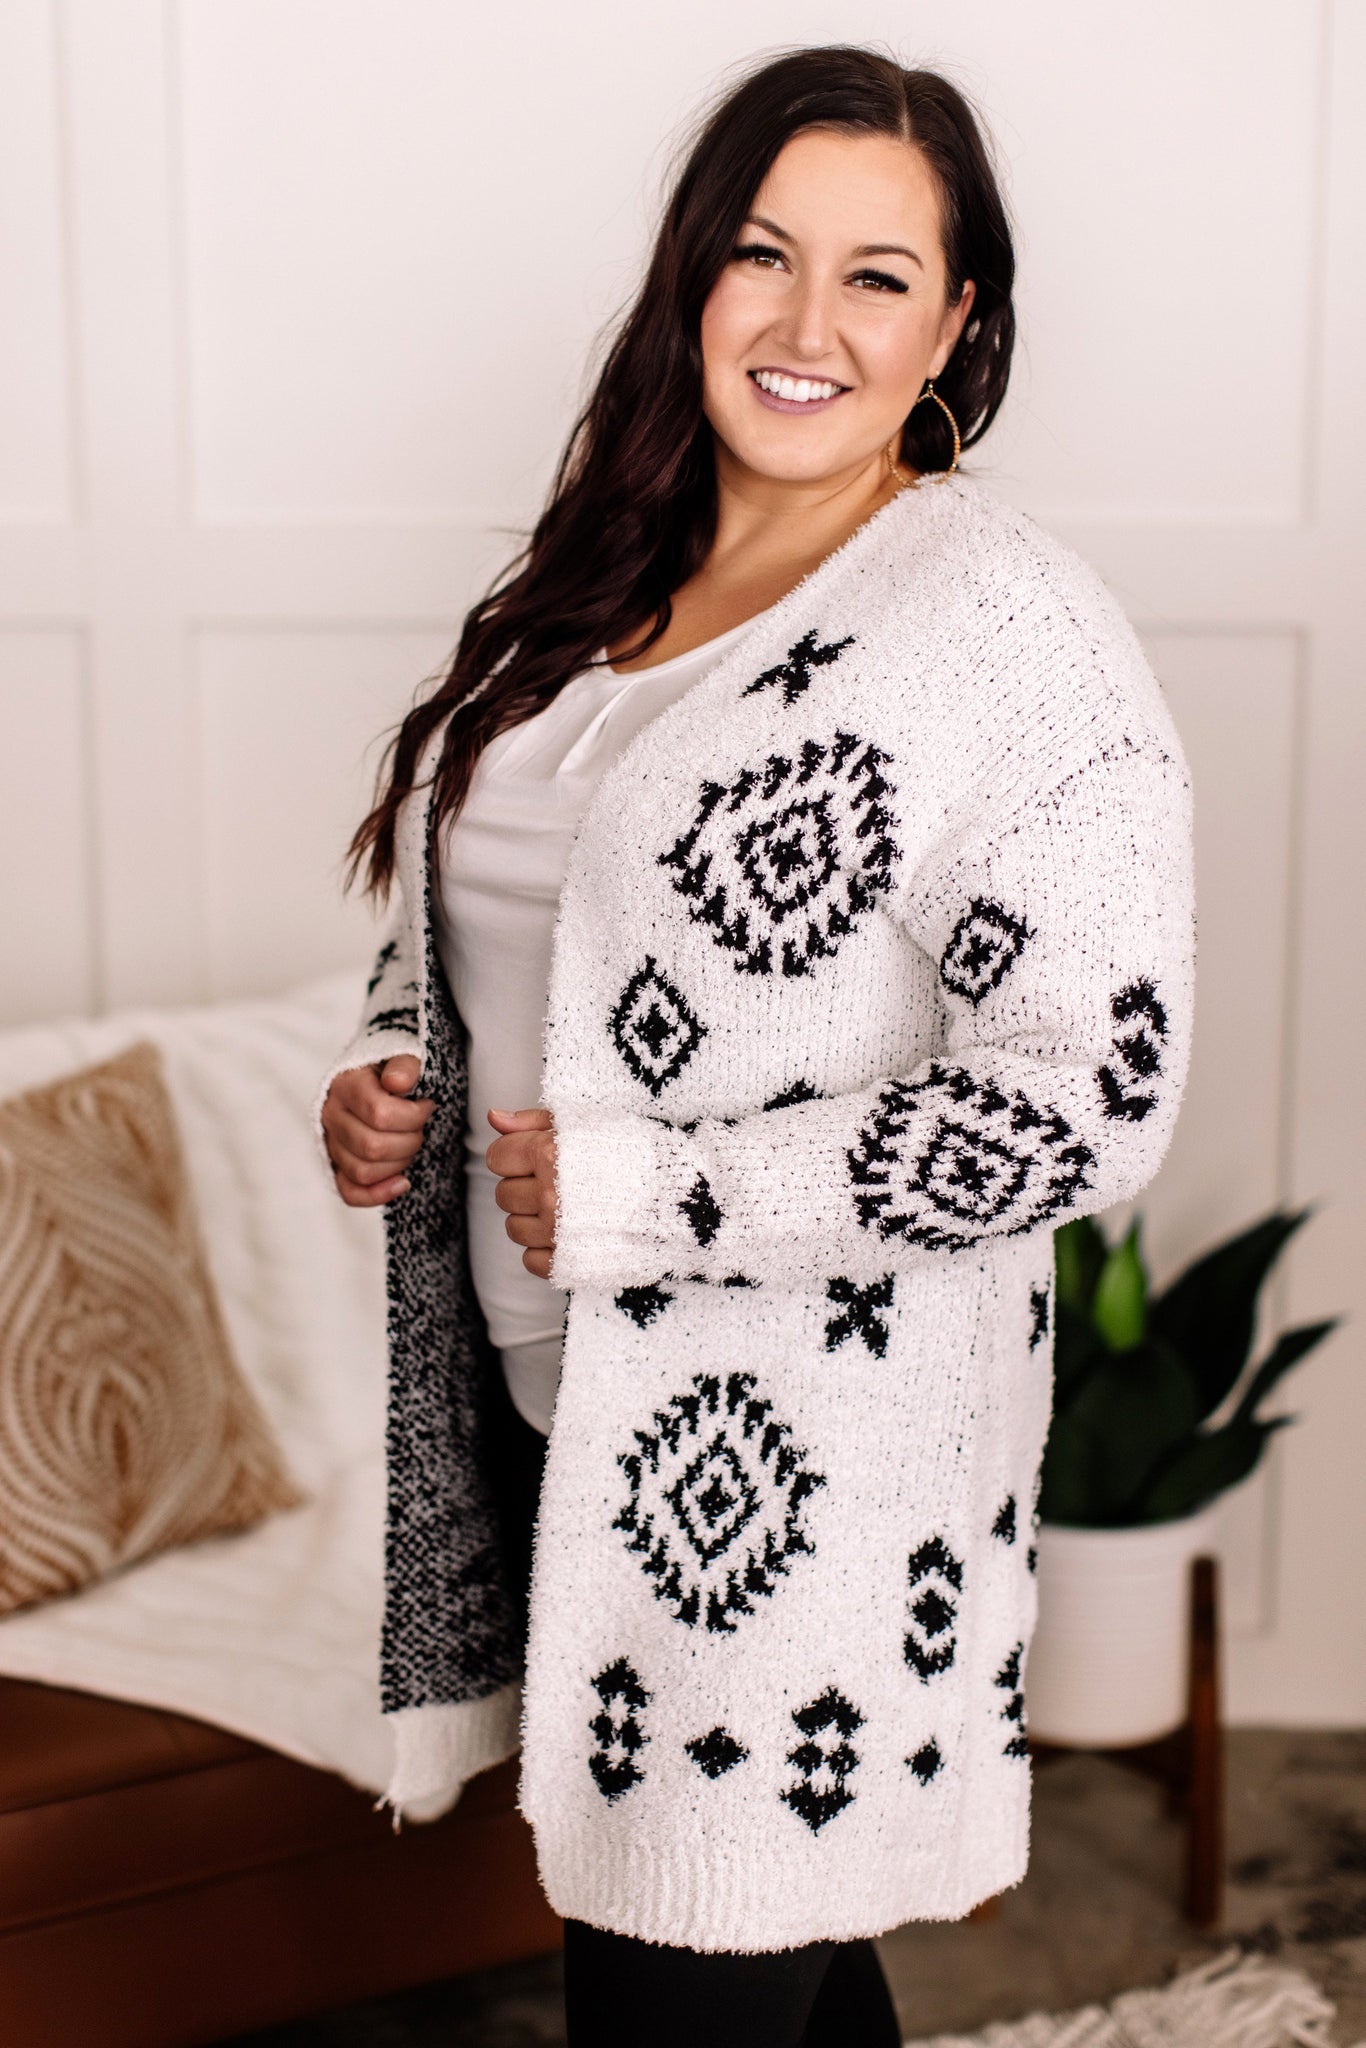 OUTLET - *The Cozy Factor Aztec Print Cardigan - Large